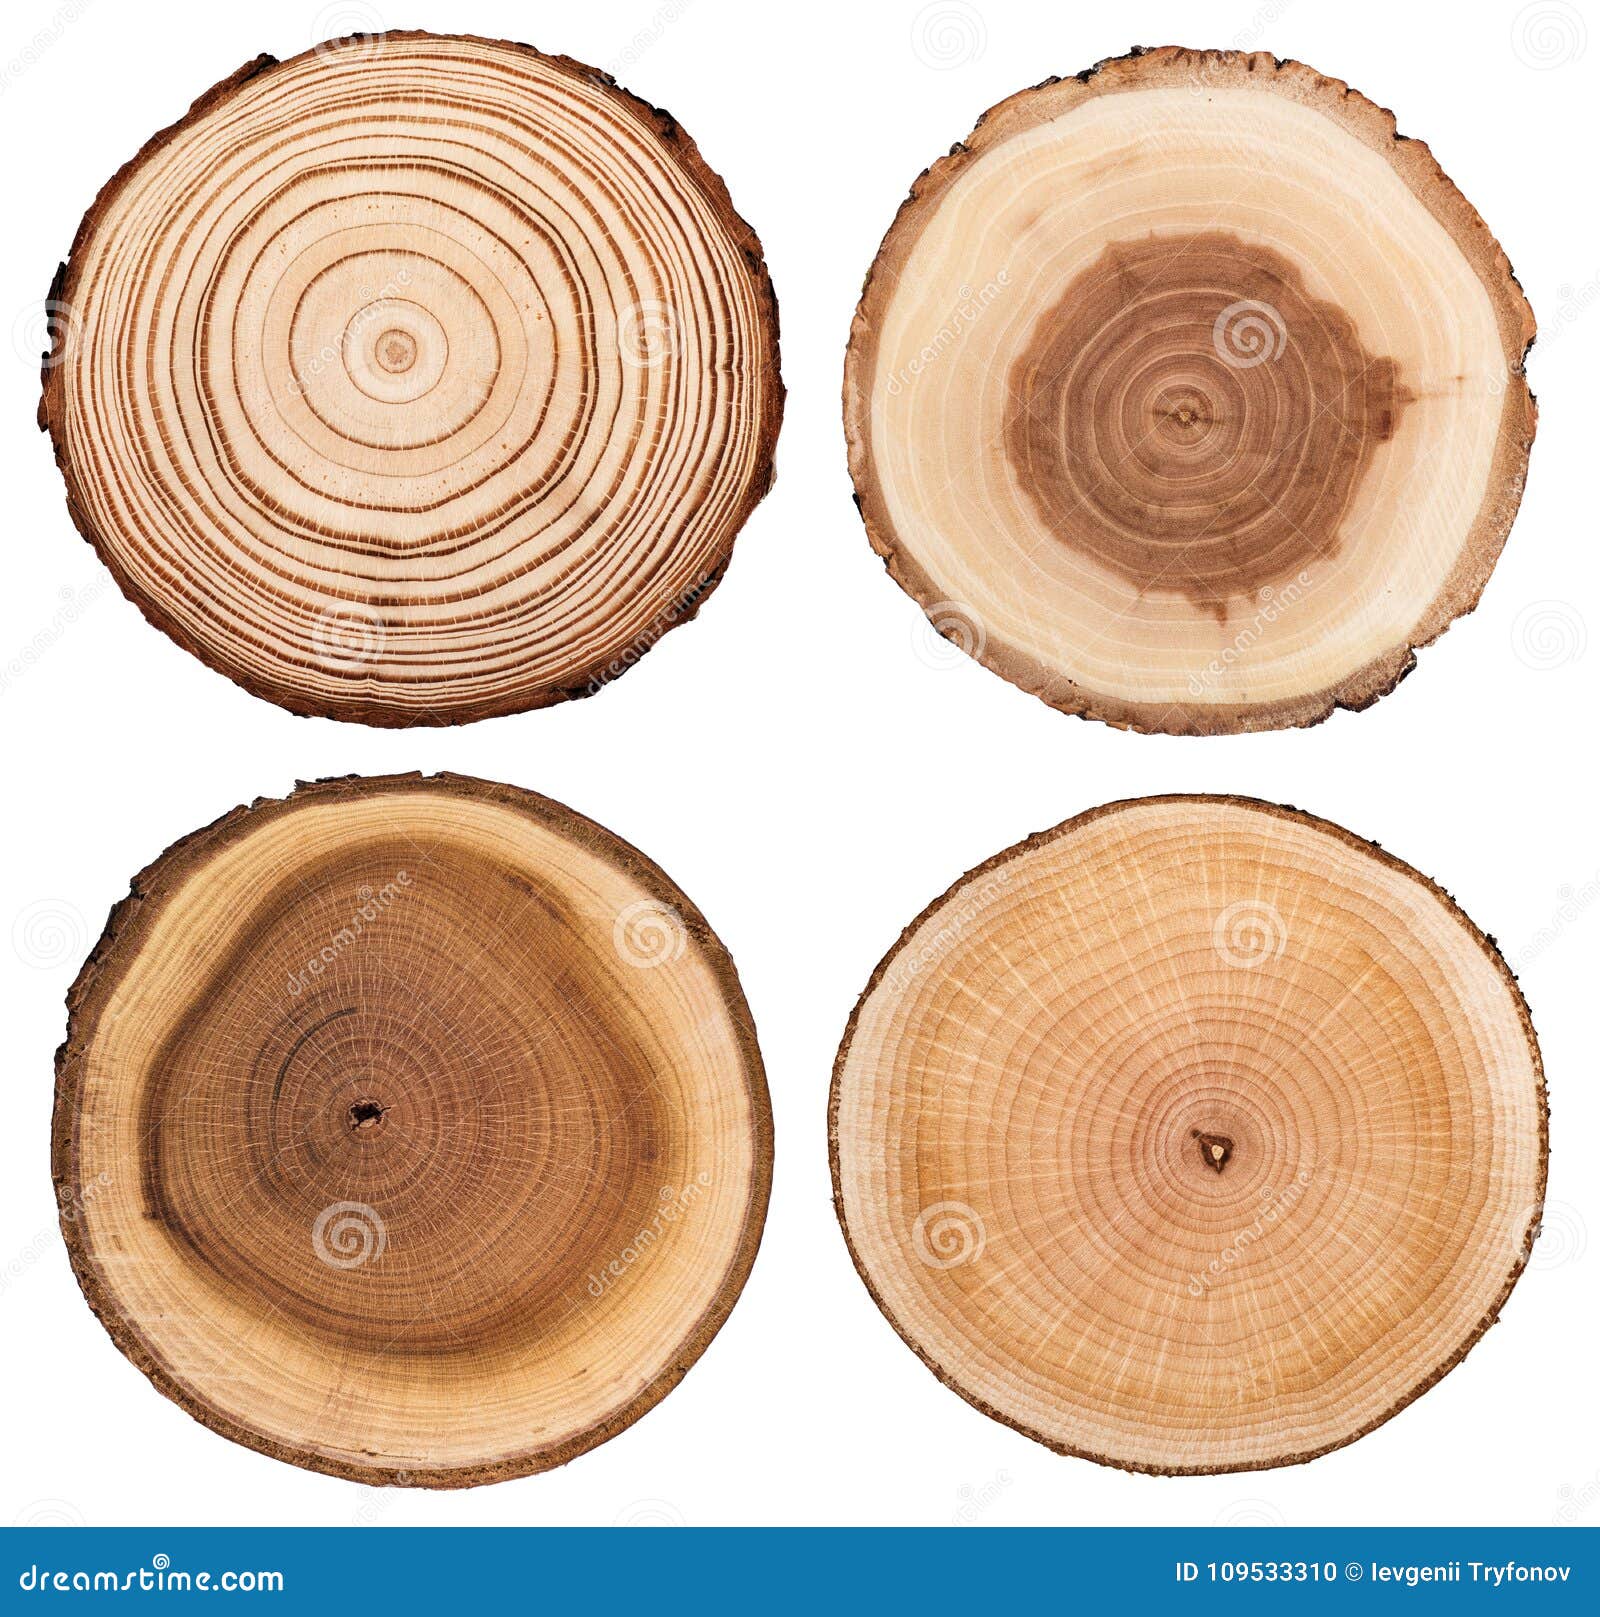 Tree trunk with rings. Annual tree growth rings. vector illustration  isolated on white background. - SuperStock